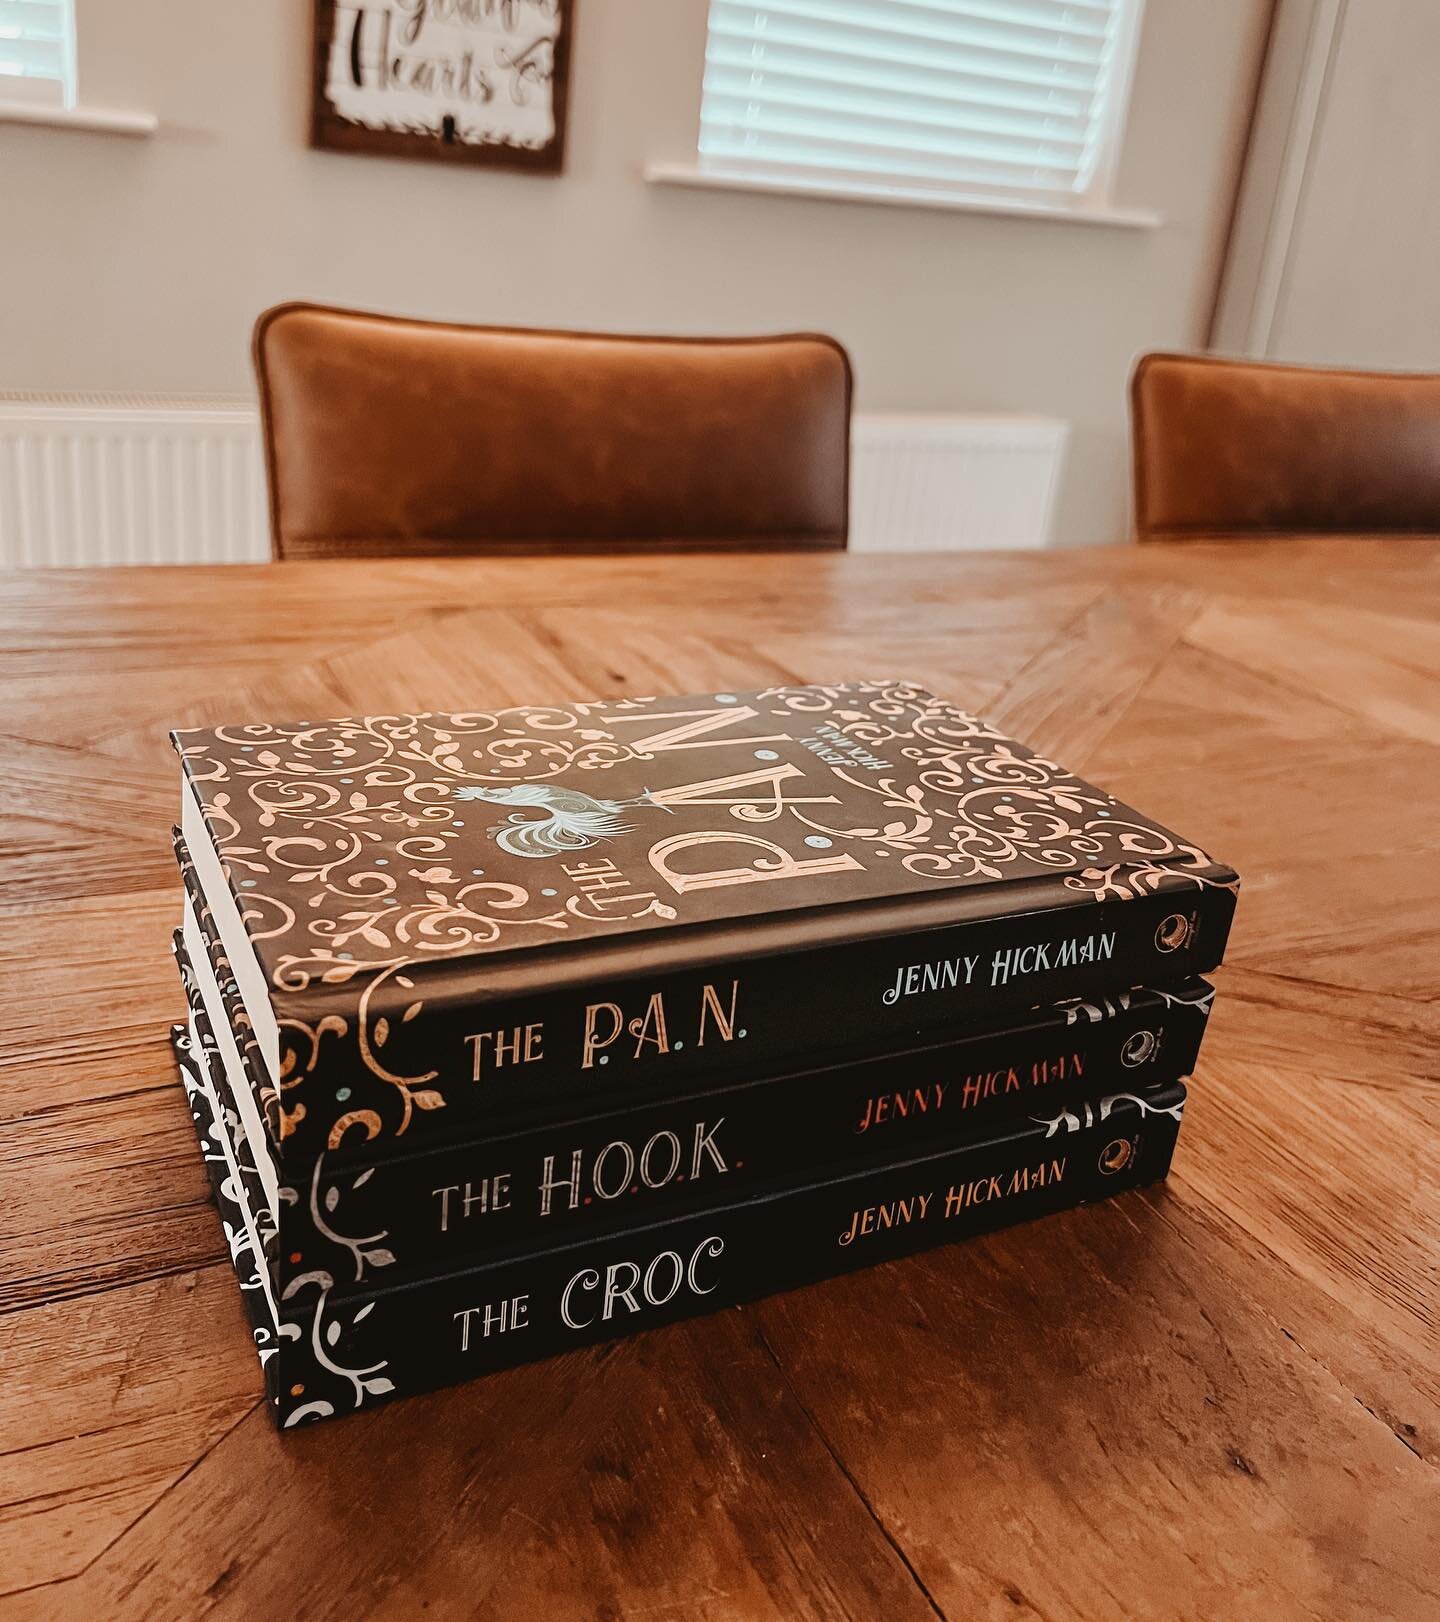 Looking for something to read this holiday weekend? The complete PAN Trilogy is available to read for FREE in KU 🖤

💚 The PAN
🖤The HOOK 
💙 The CROC

(Also available in ebook, paperback, hardcover, audiobook, YA and NA Special Edition&mdash;6/10 o